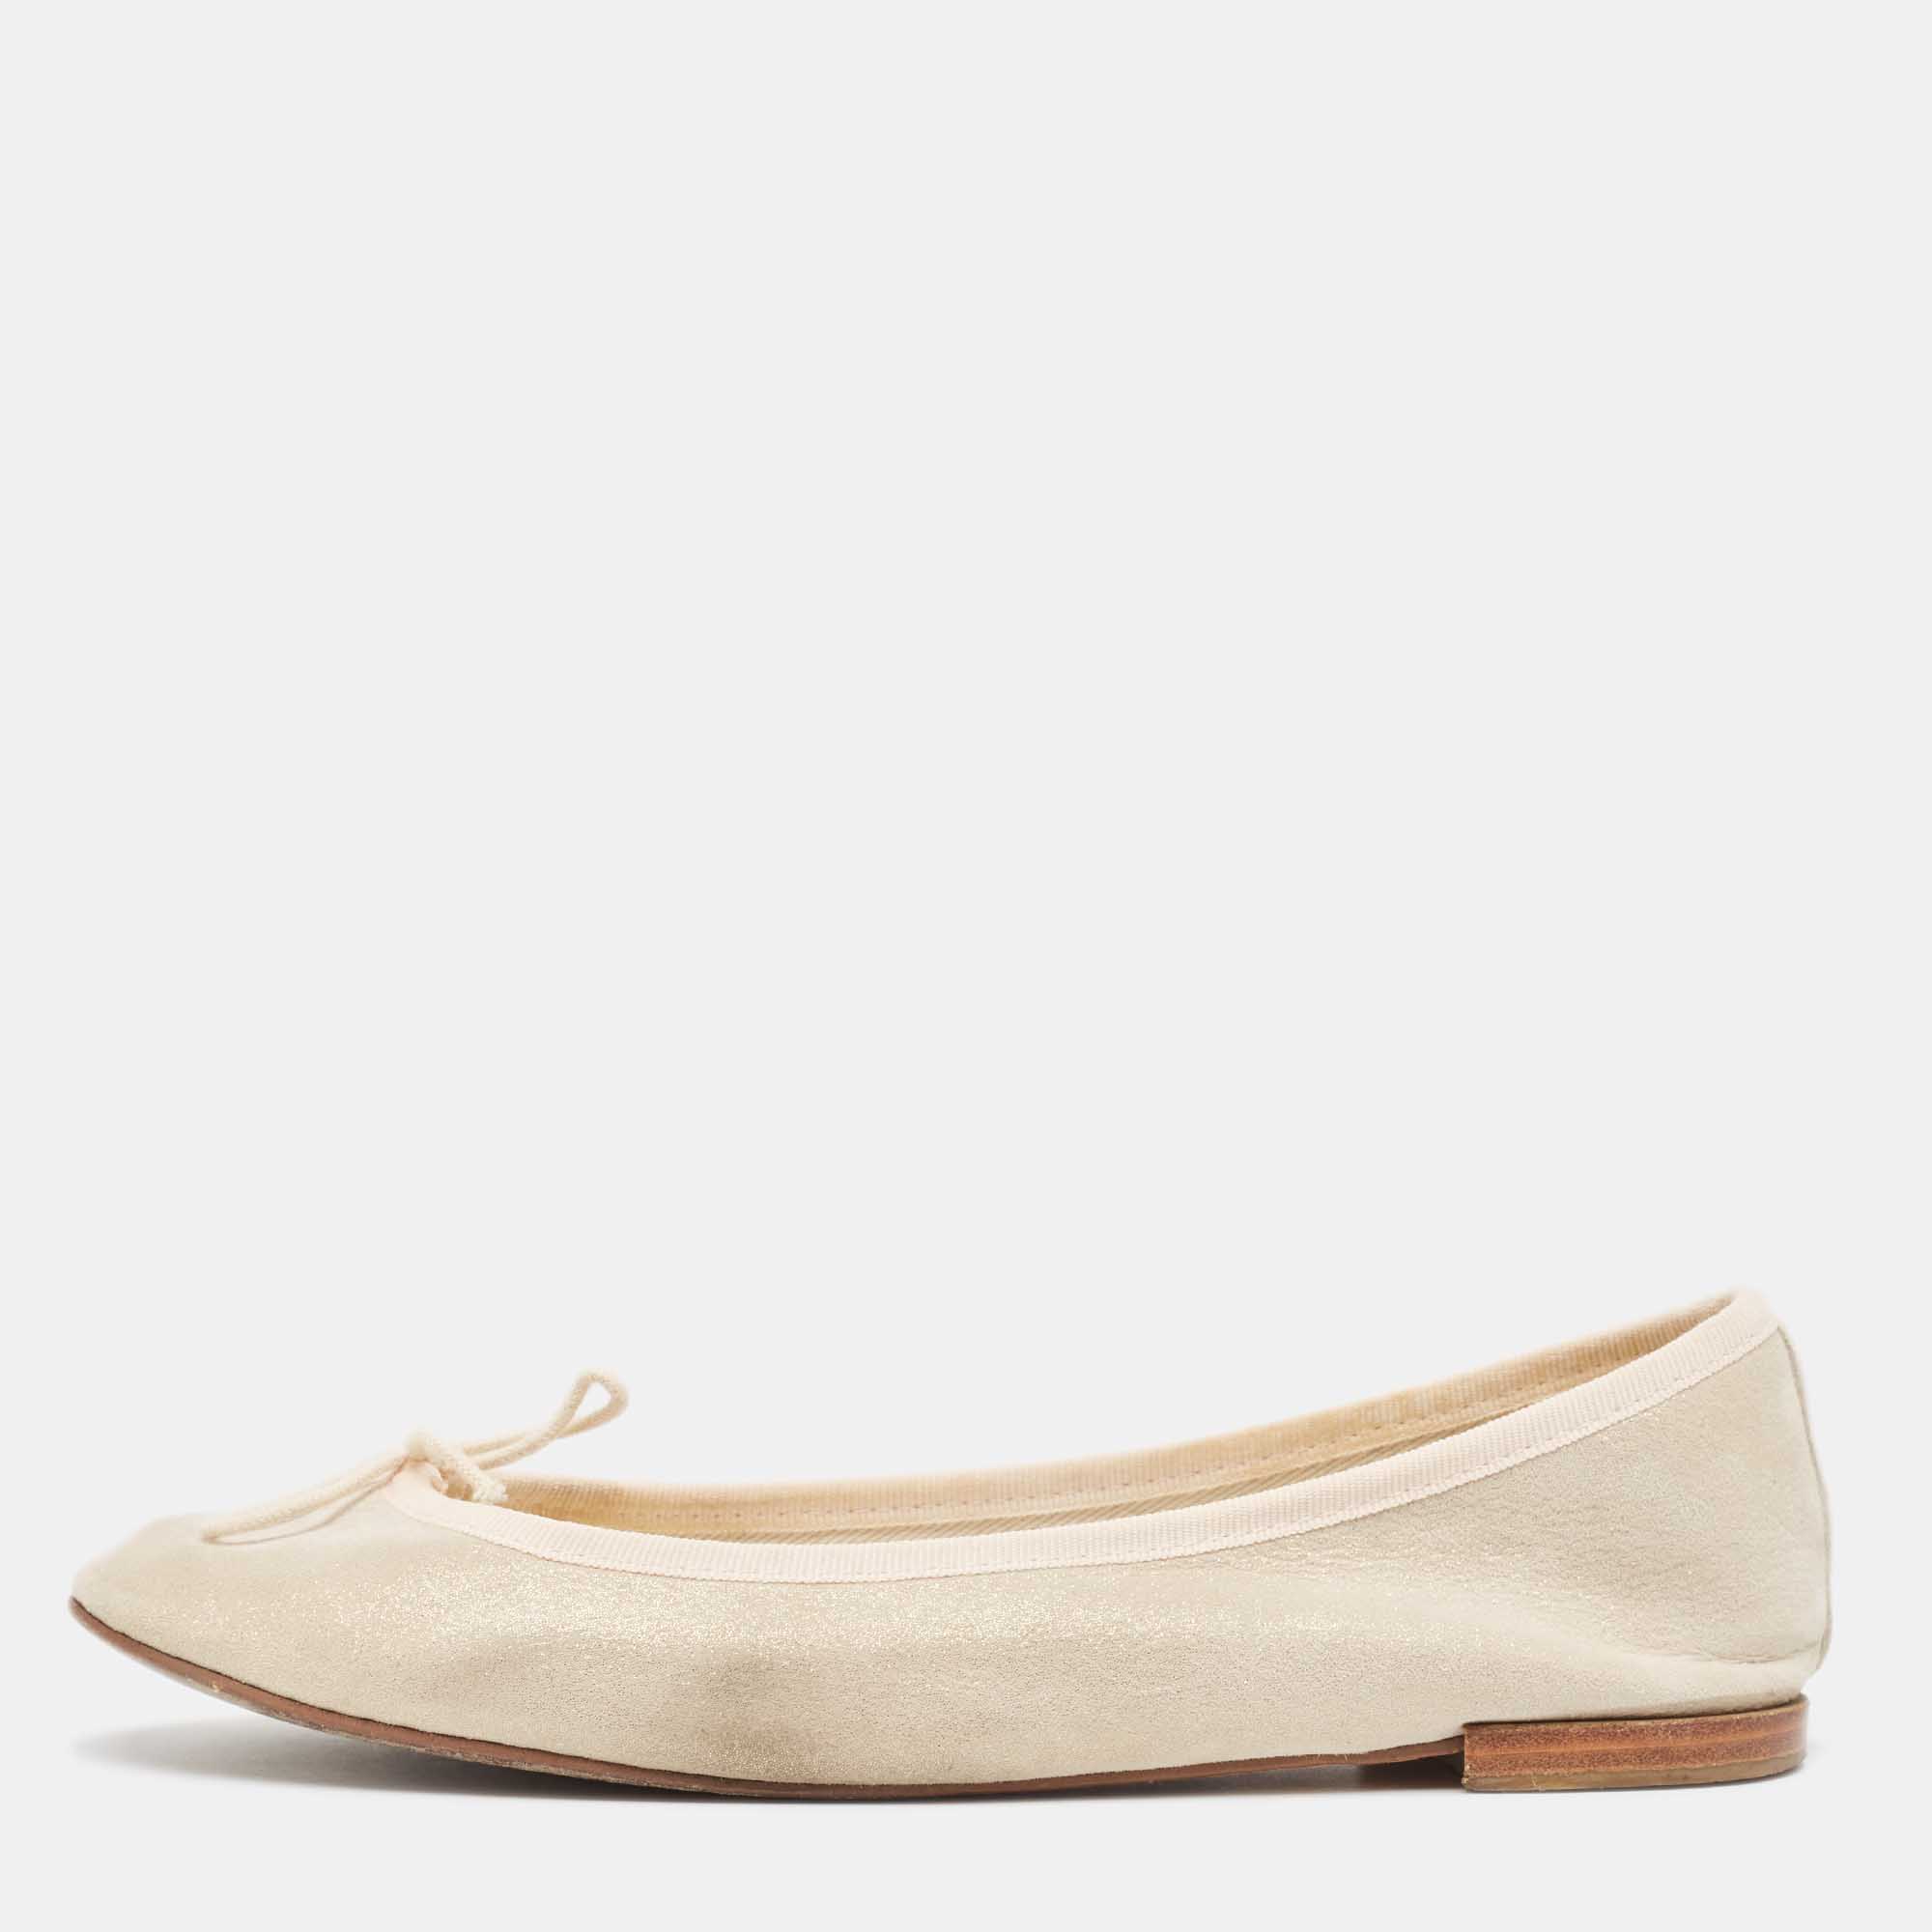 Pre-owned Repetto Cream Glitter Suede Bow Ballet Flats Size 38.5